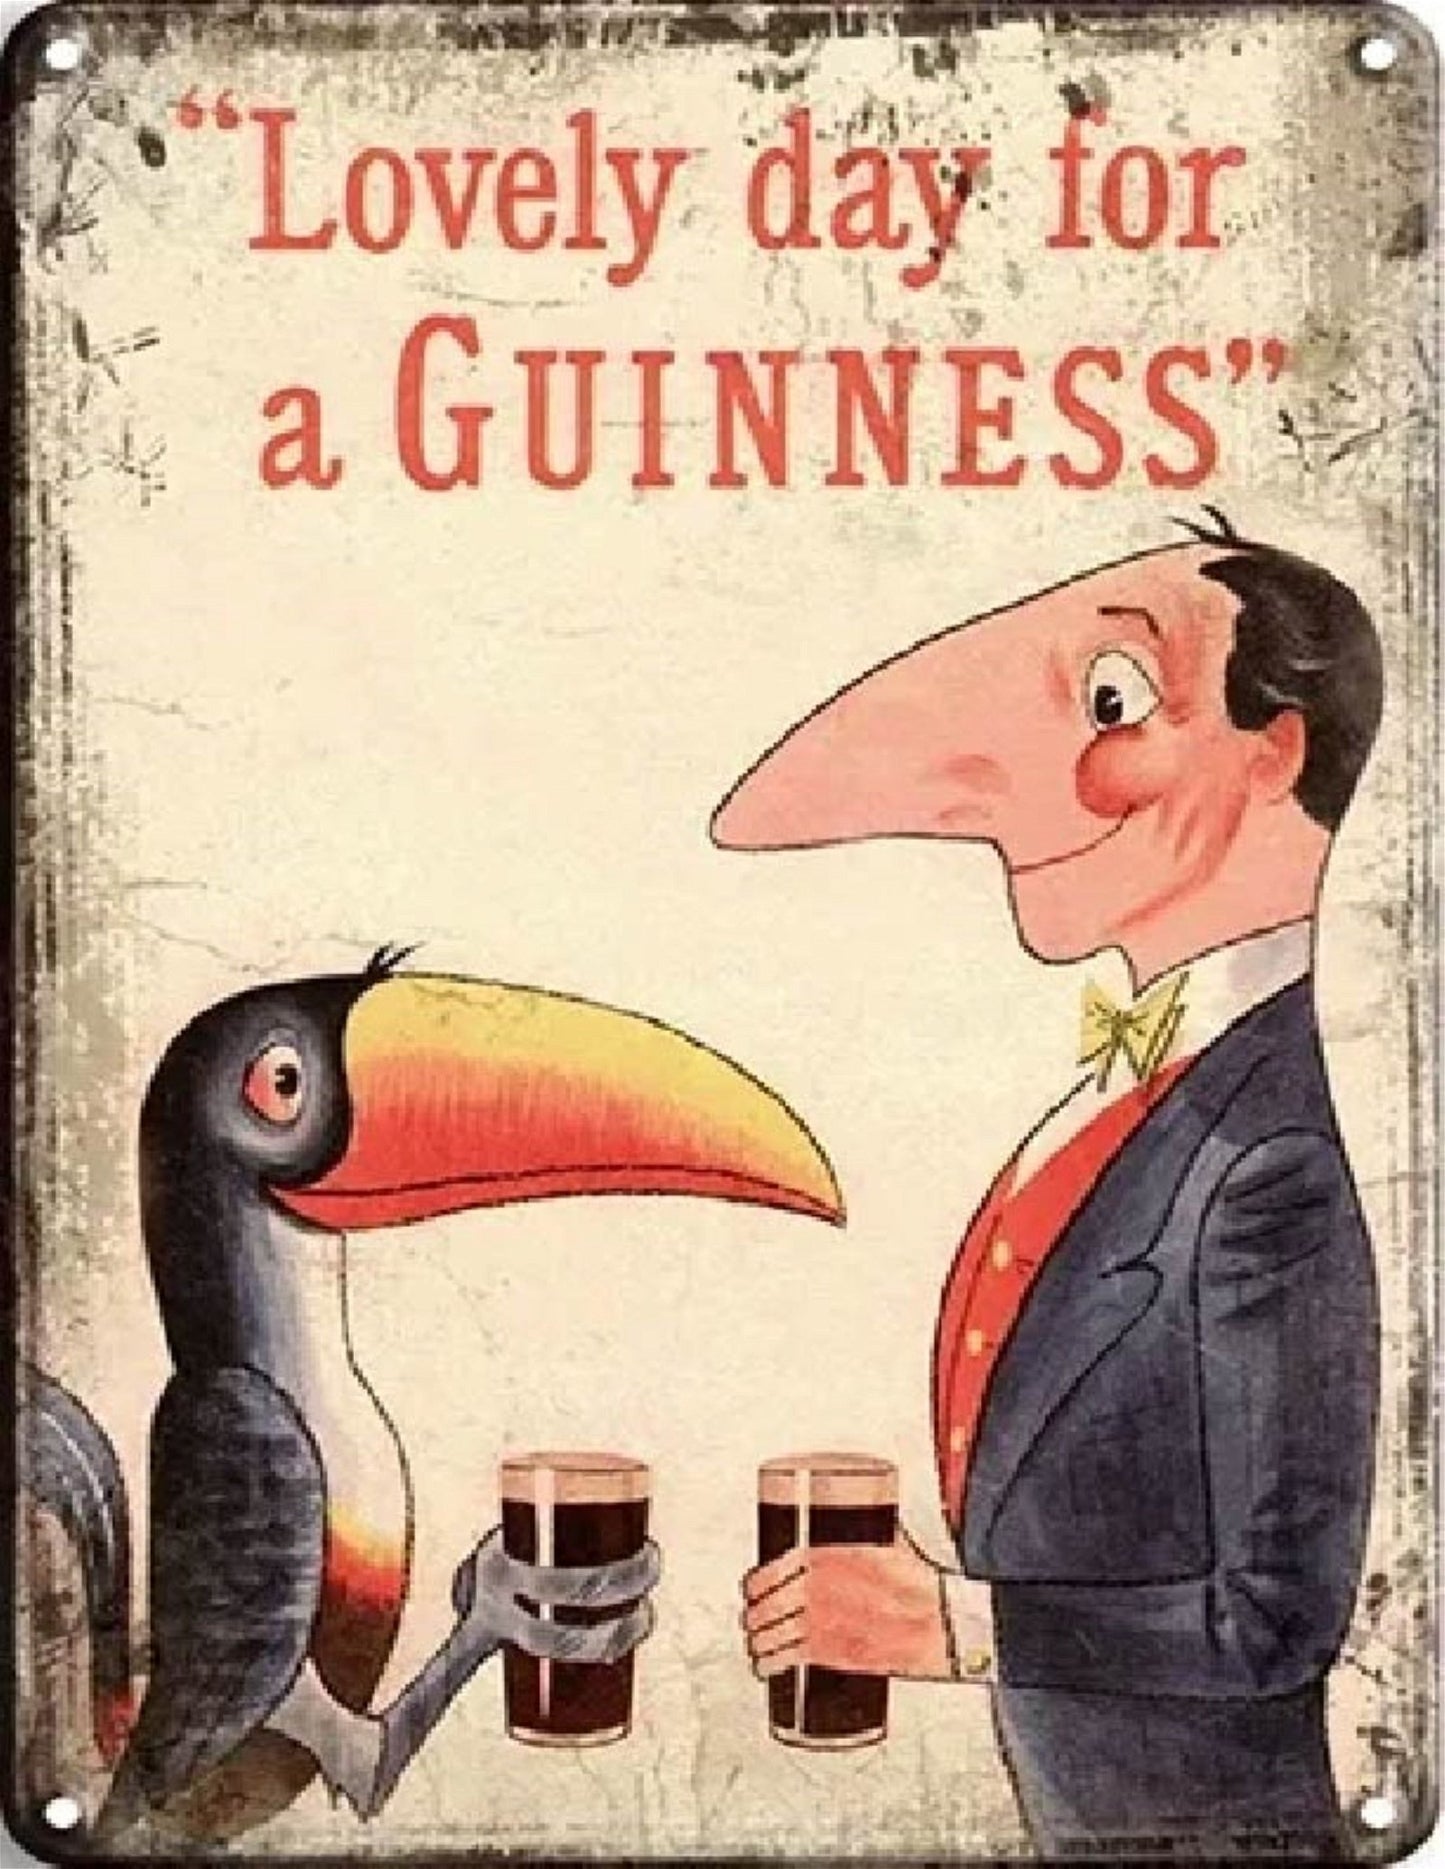 Large Metal Sign 60 x 49.5cm Guinness Toucan